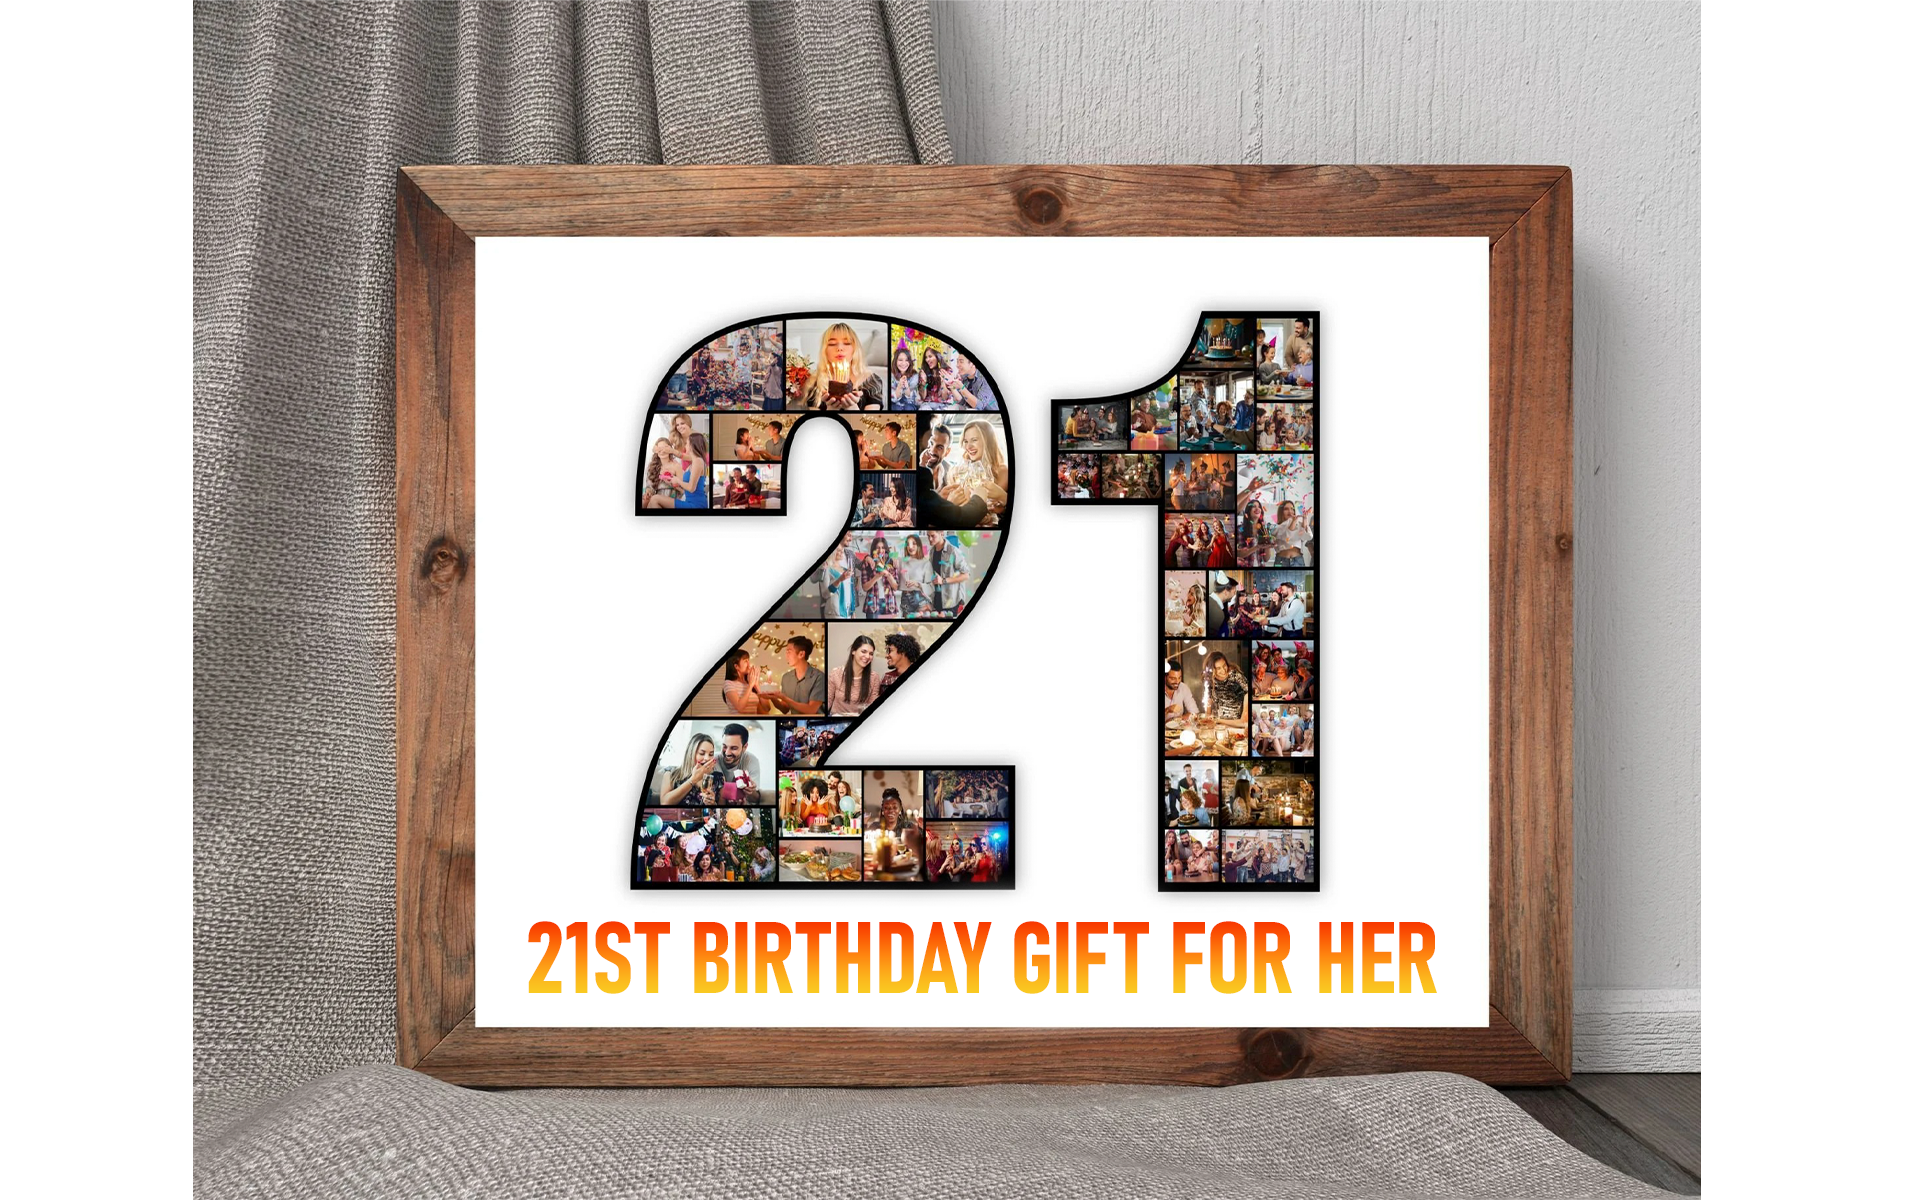 Best 21st Birthday Gifts To Celebrate The Big Day For Her